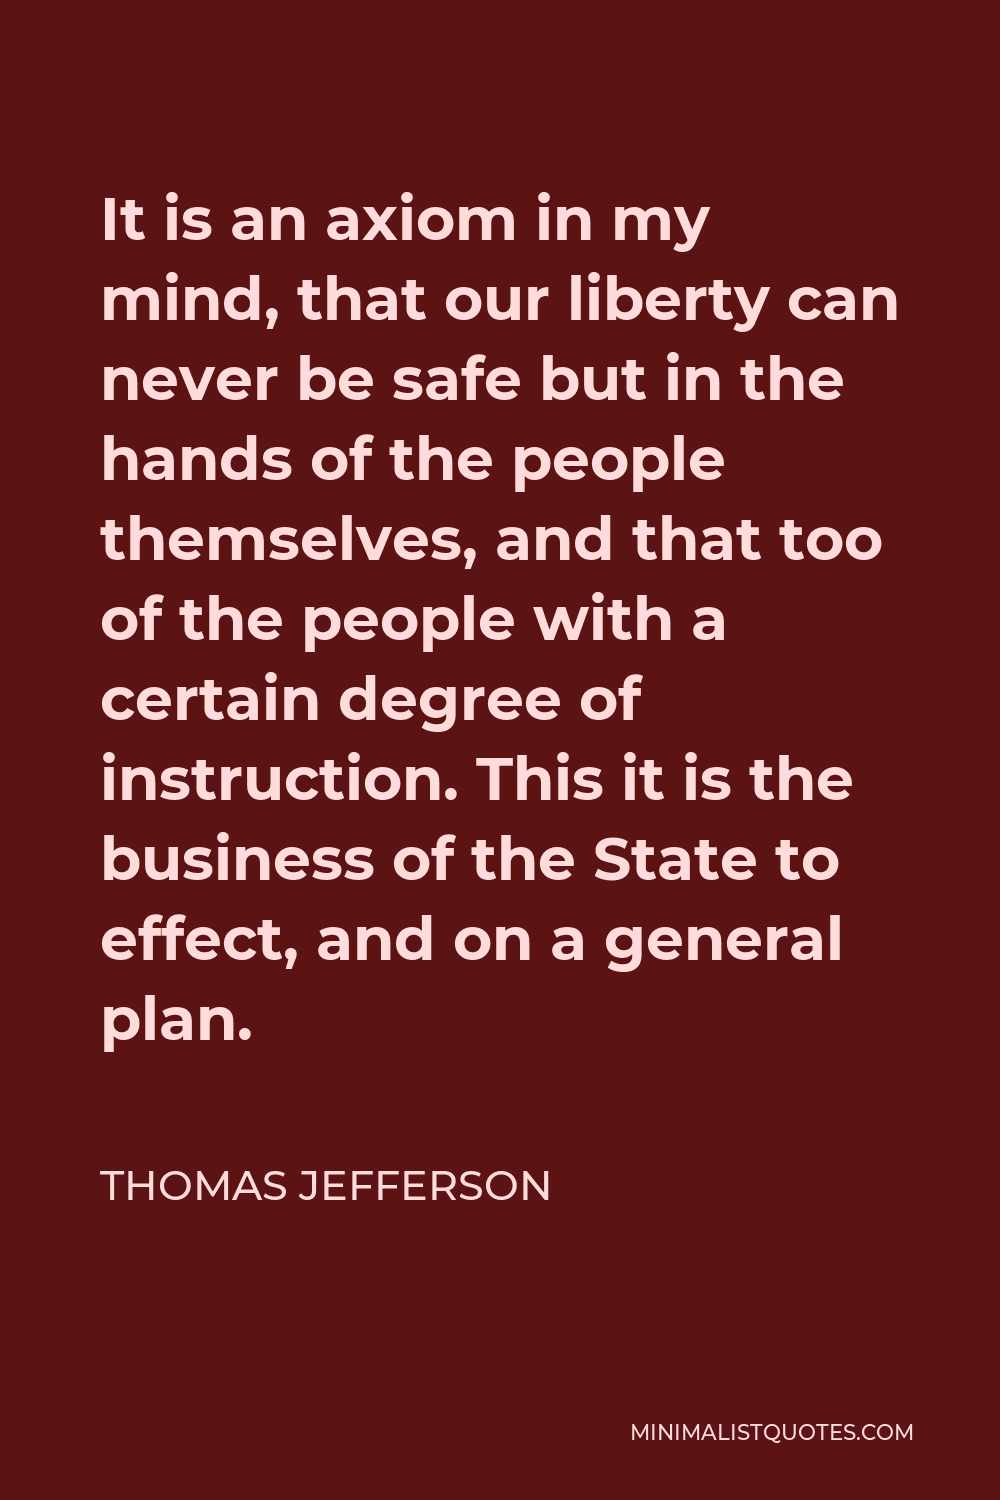 Thomas Jefferson Quote - It is an axiom in my mind, that our liberty can never be safe but in the hands of the people themselves, and that too of the people with a certain degree of instruction. This it is the business of the State to effect, and on a general plan.